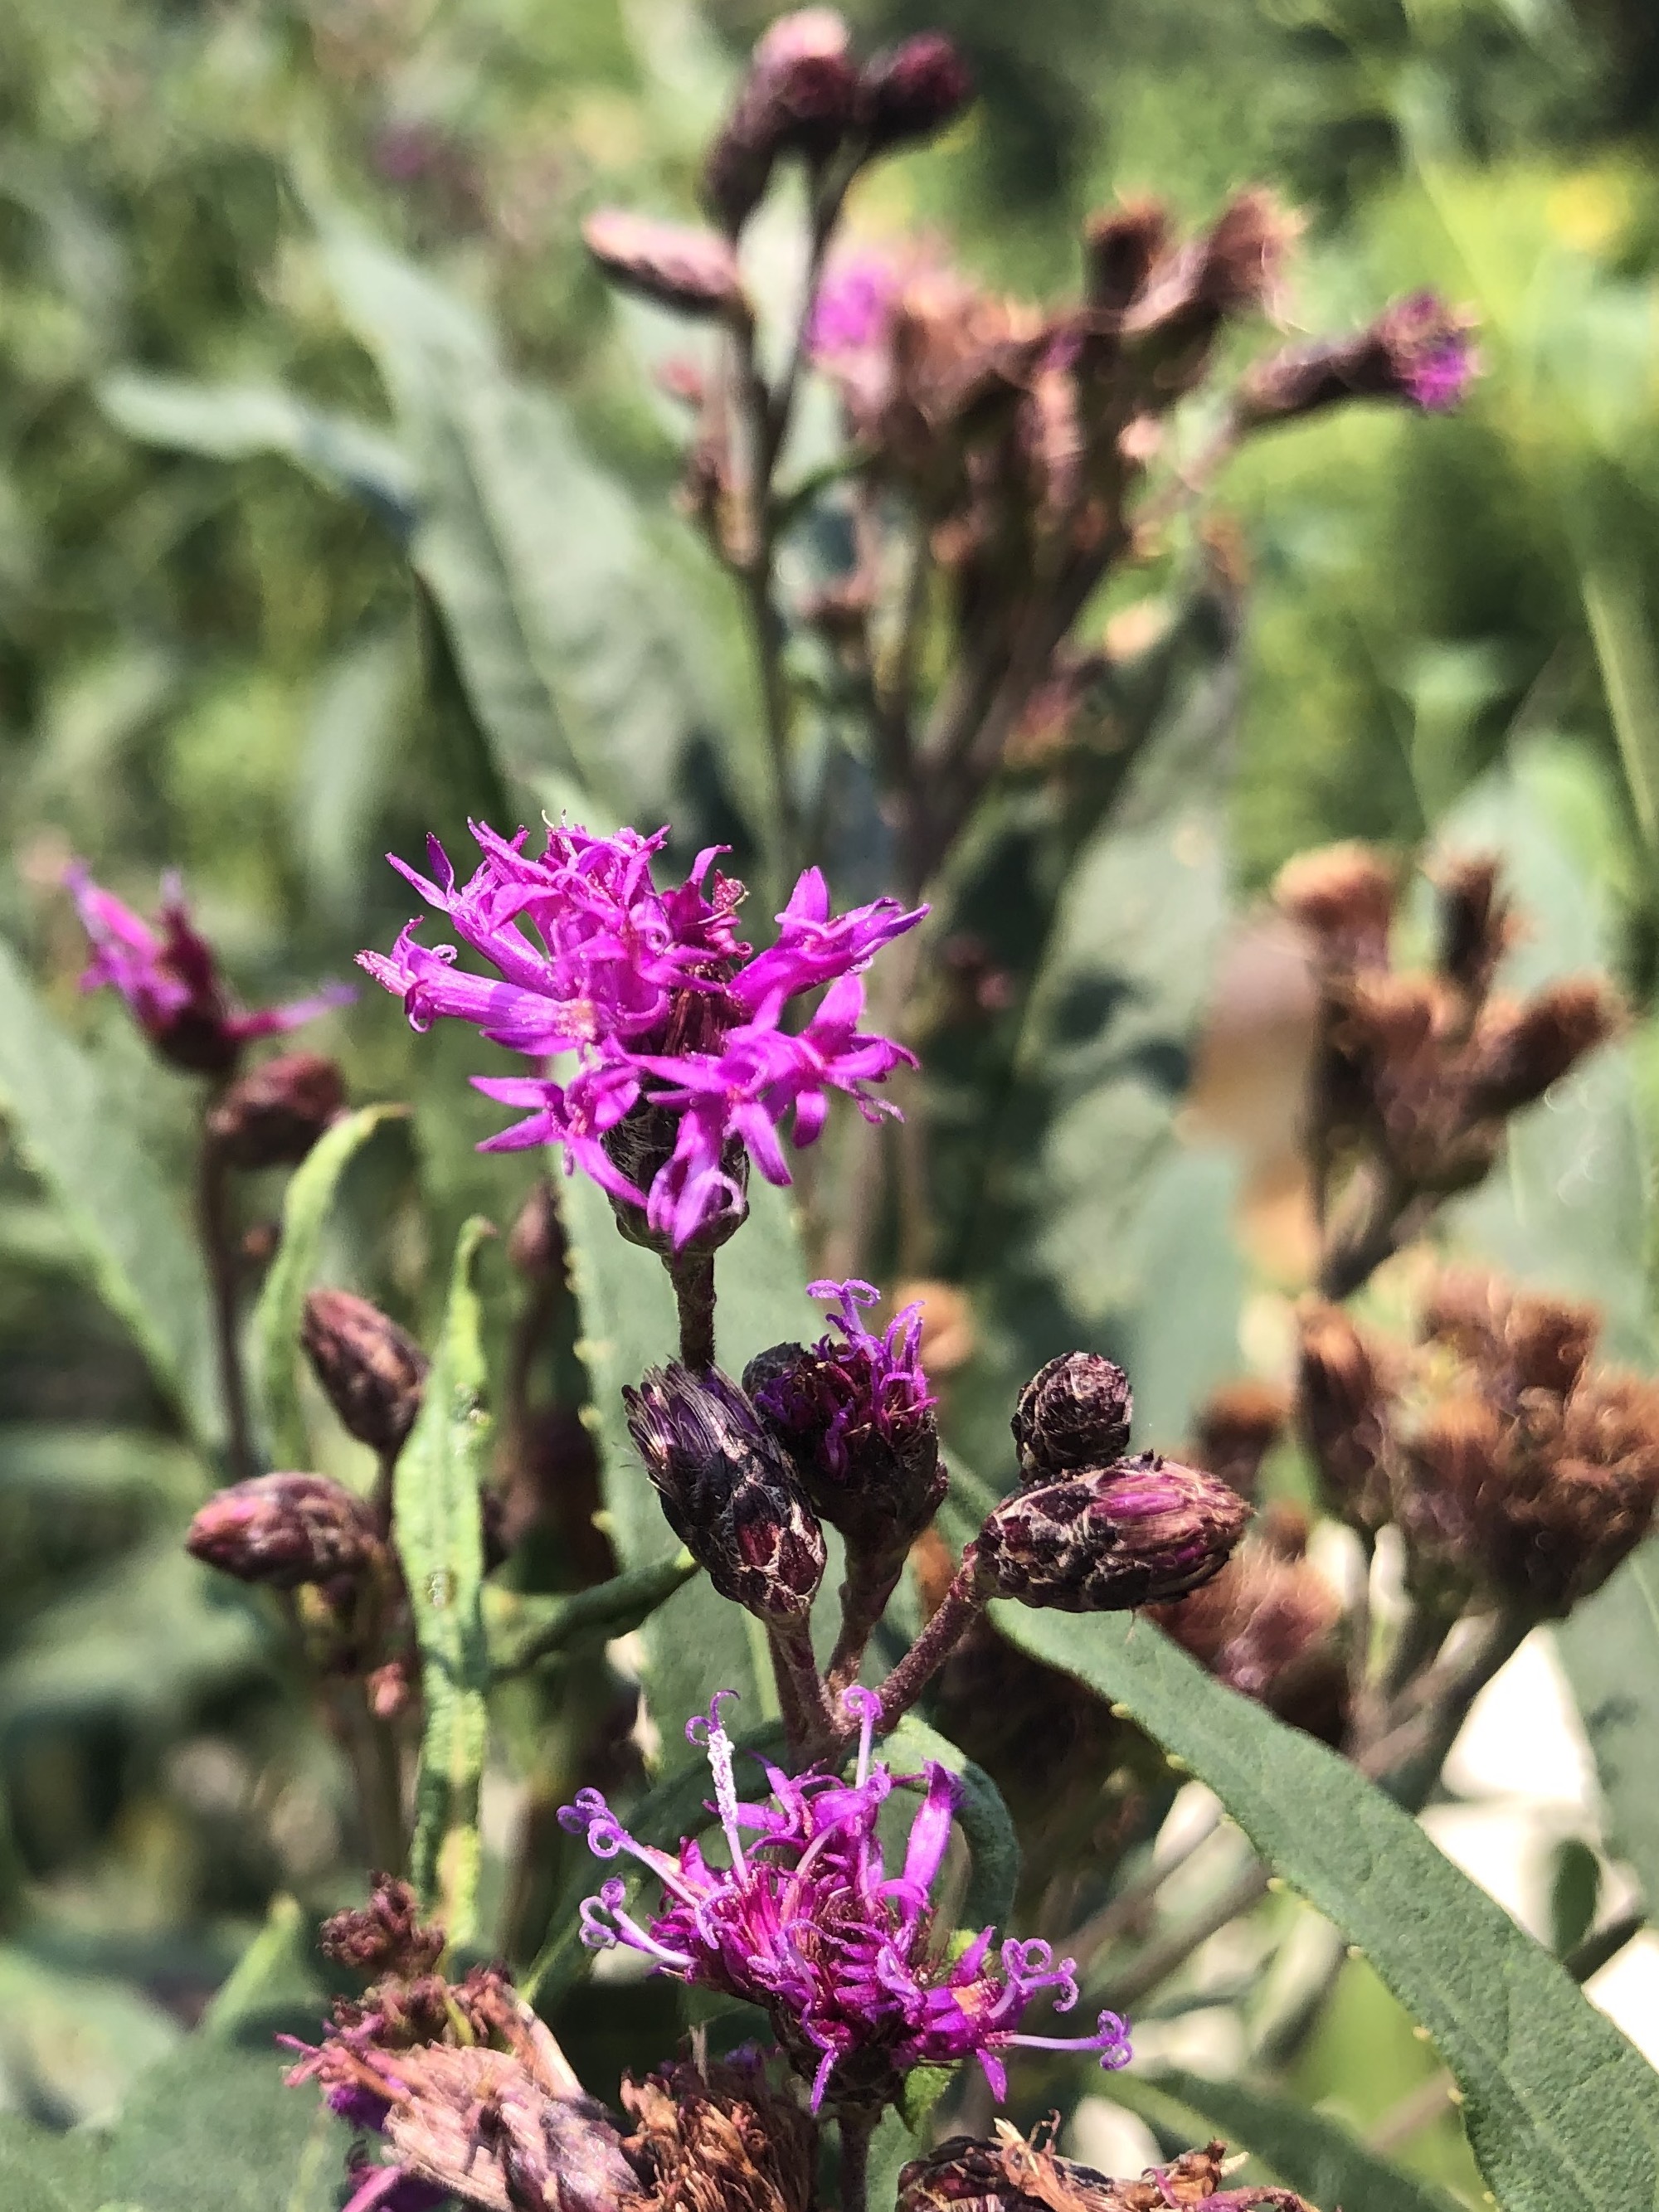 Common Ironweed along bikepath behind Gregory Street in Madison, Wisconsin on August3, 2021.